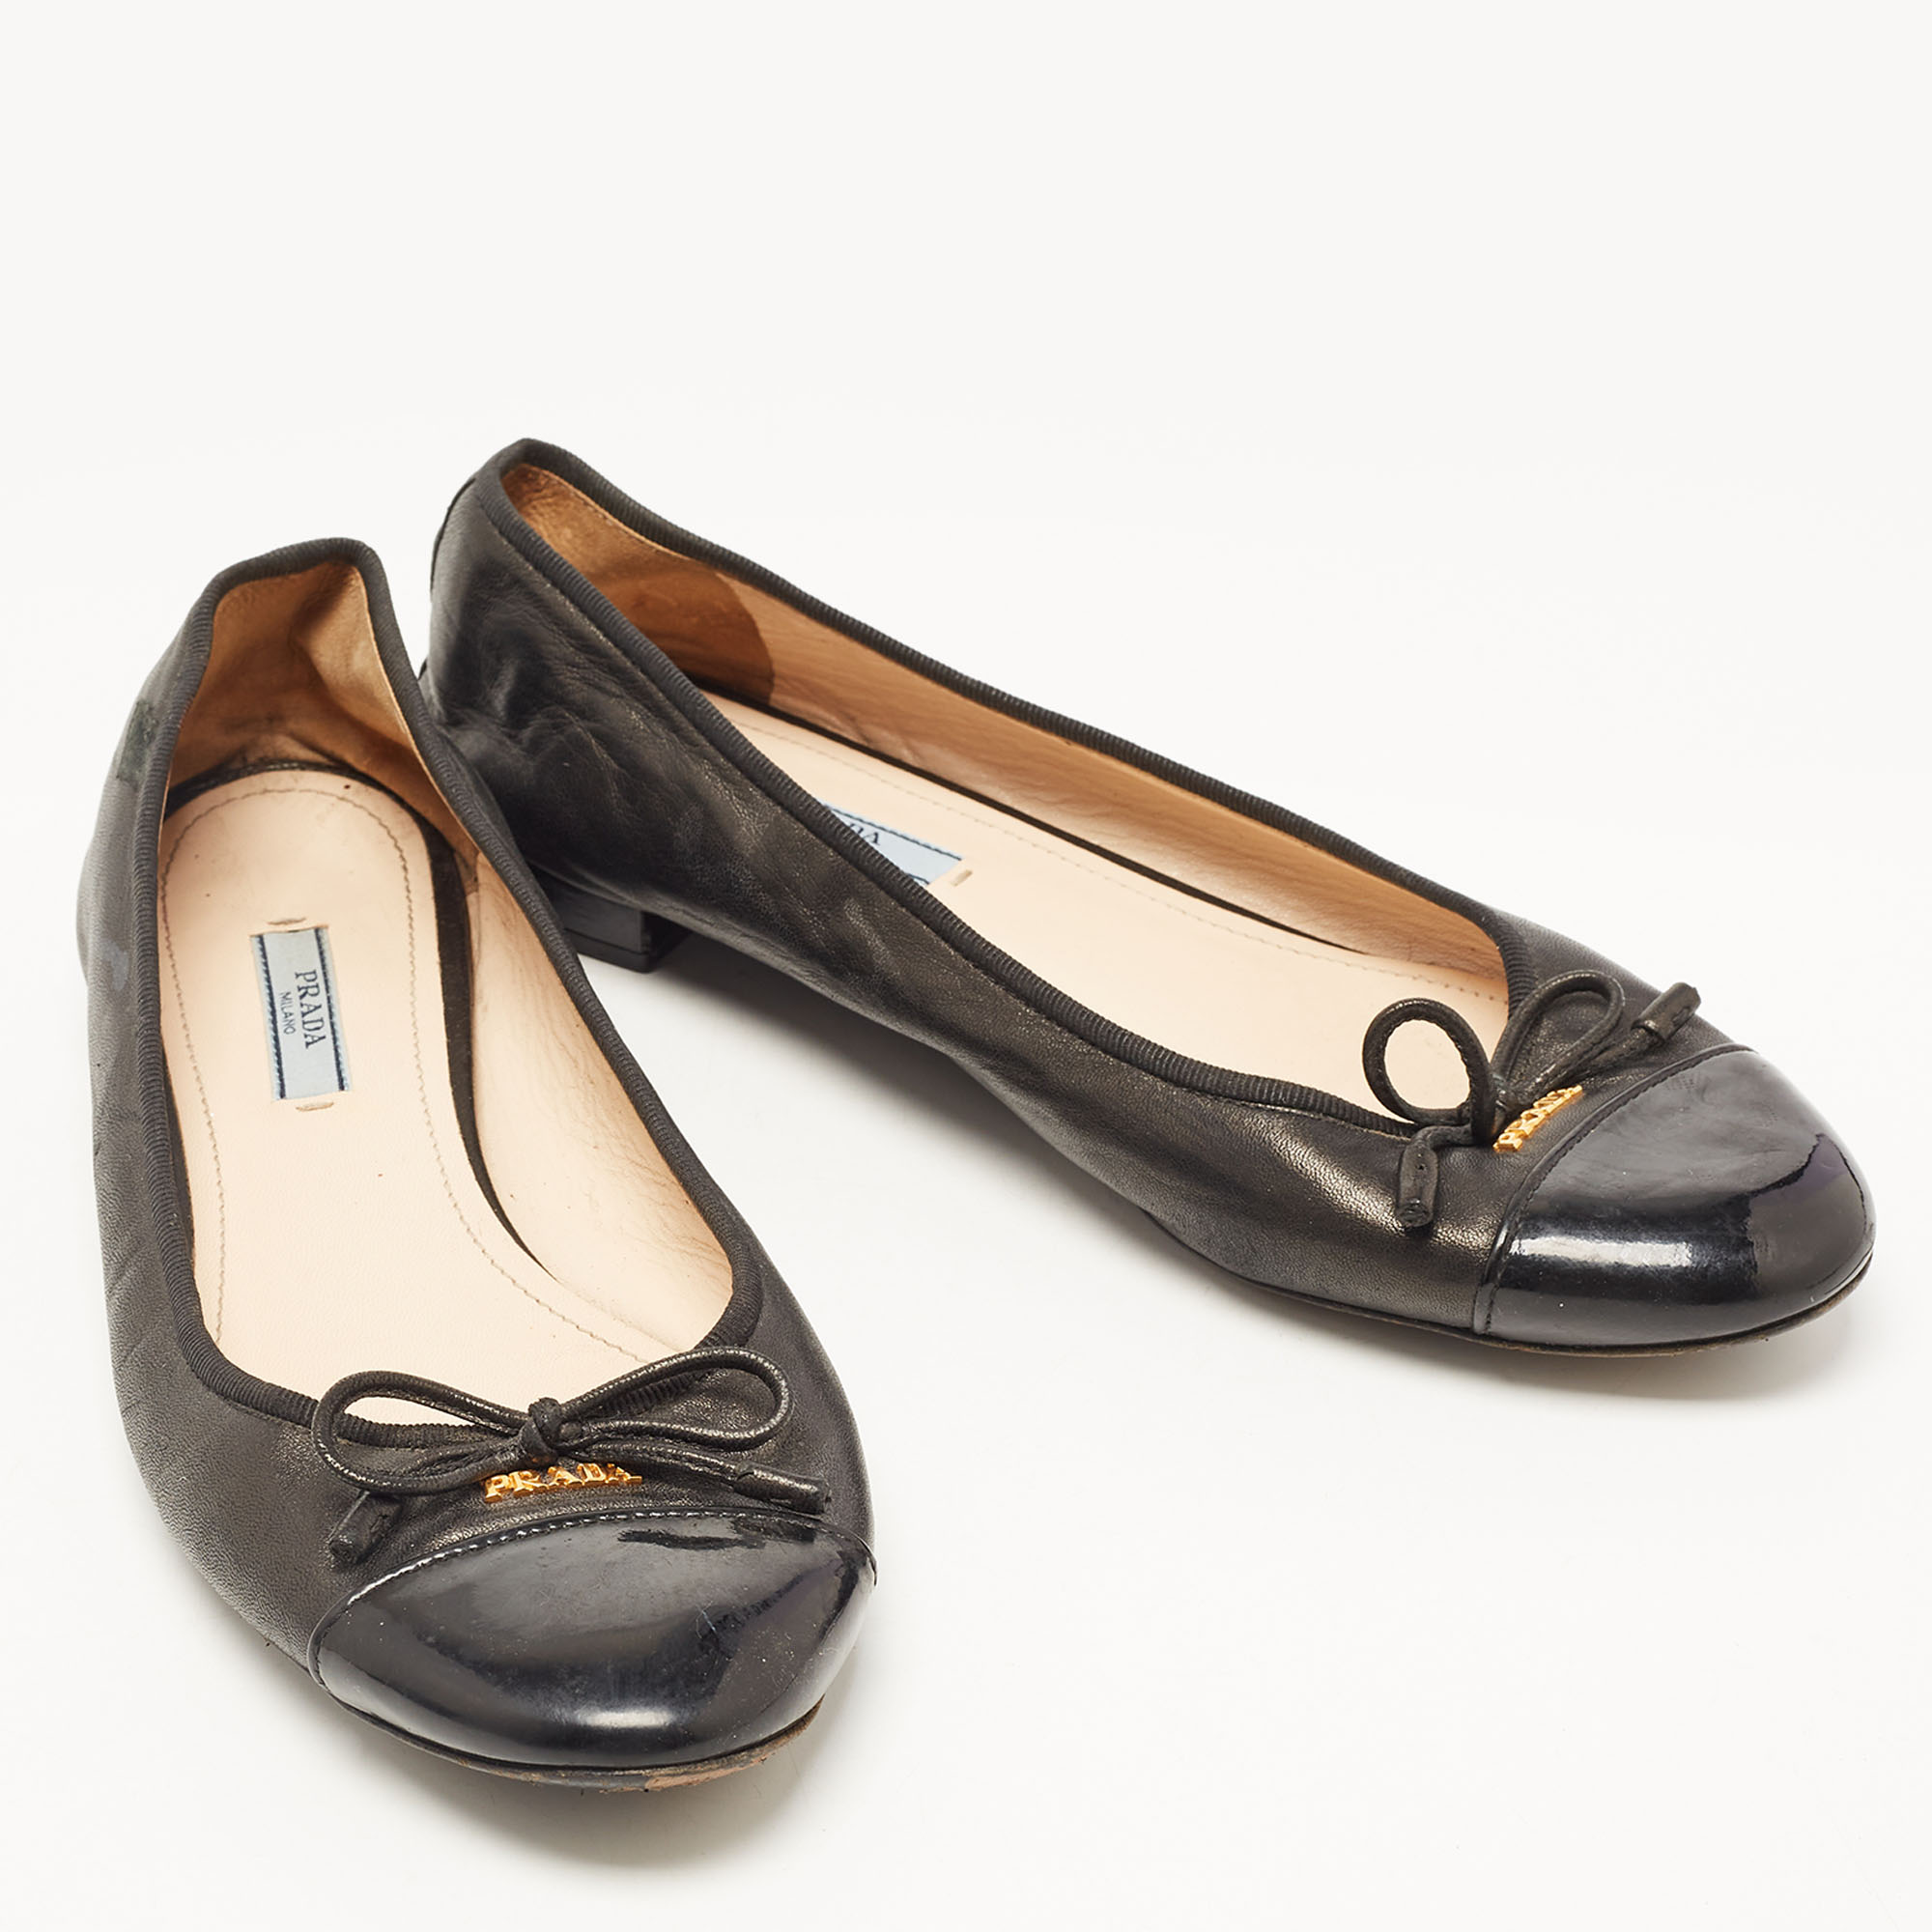 Prada Black Leather And Patent Cap Toe Bow Ballet Flats Size 40.5